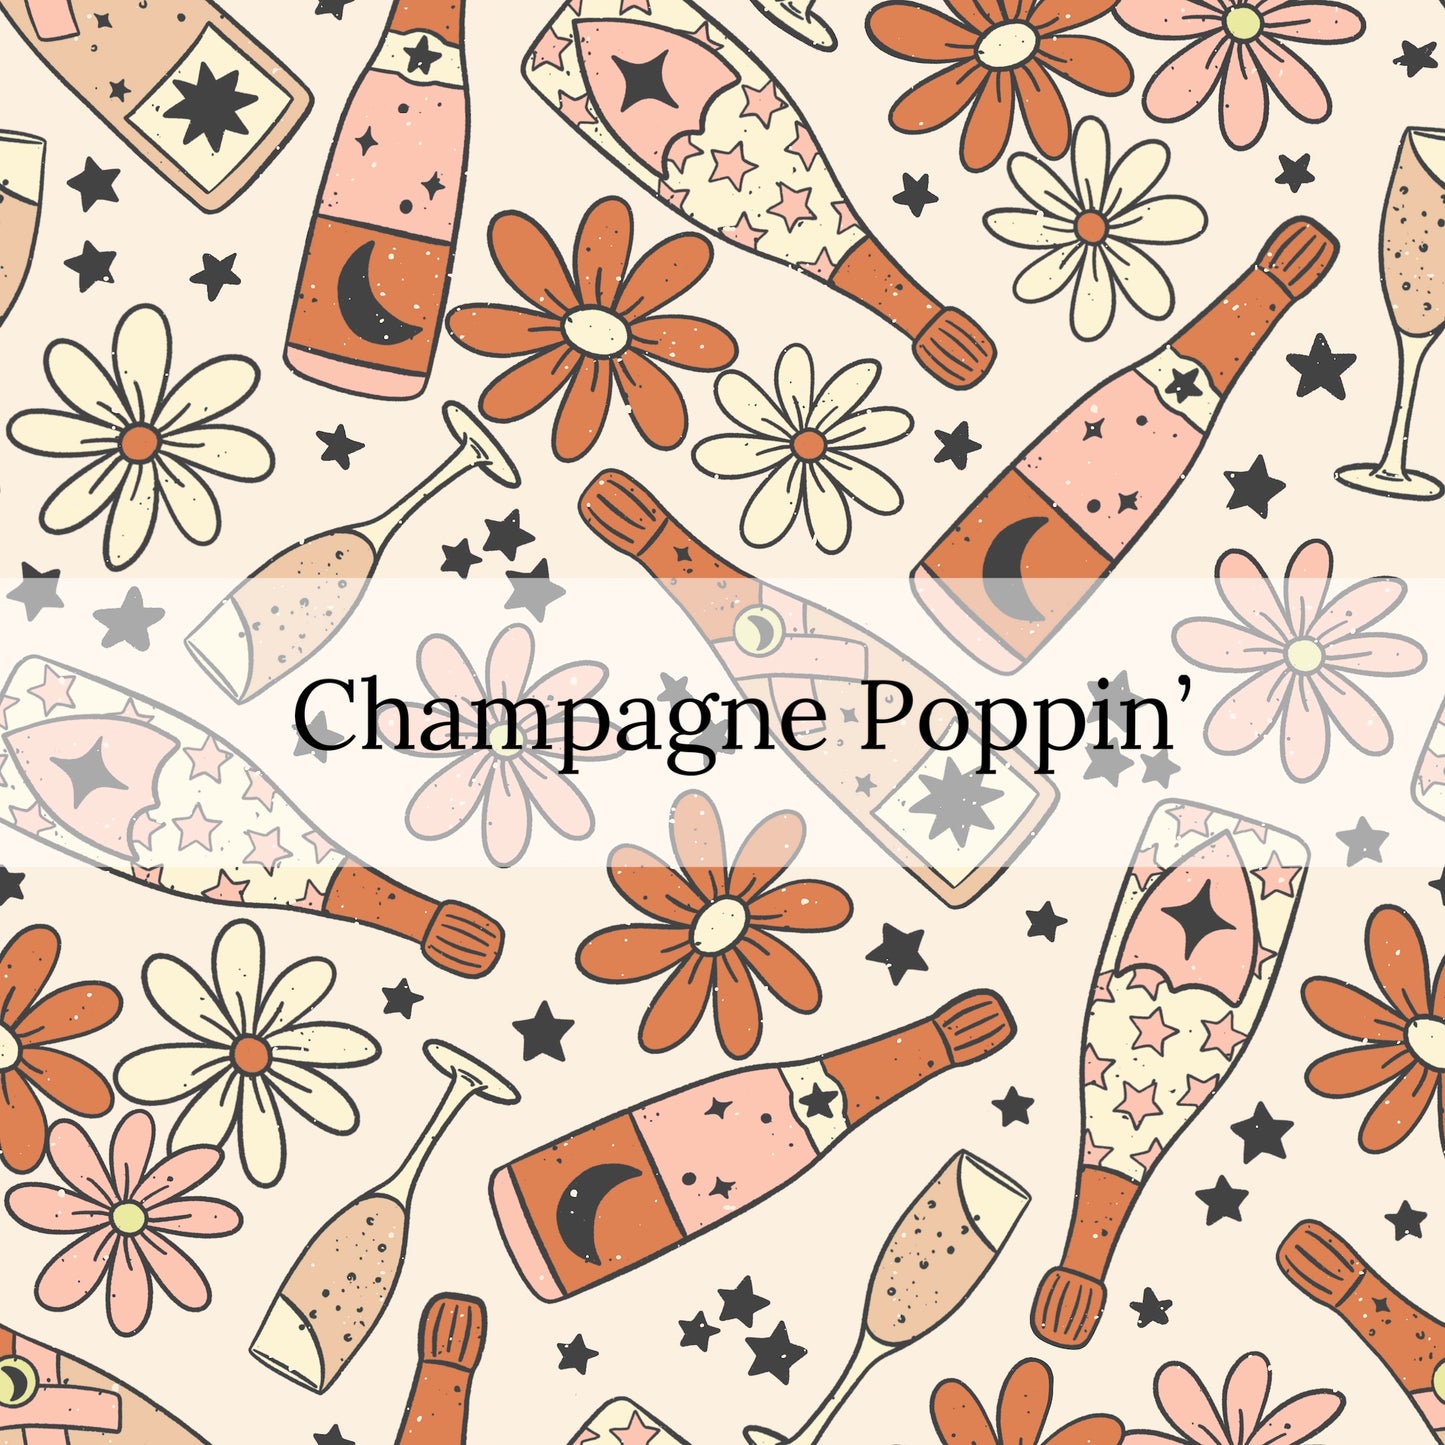 illustration of champagne bottles on a cream colored background